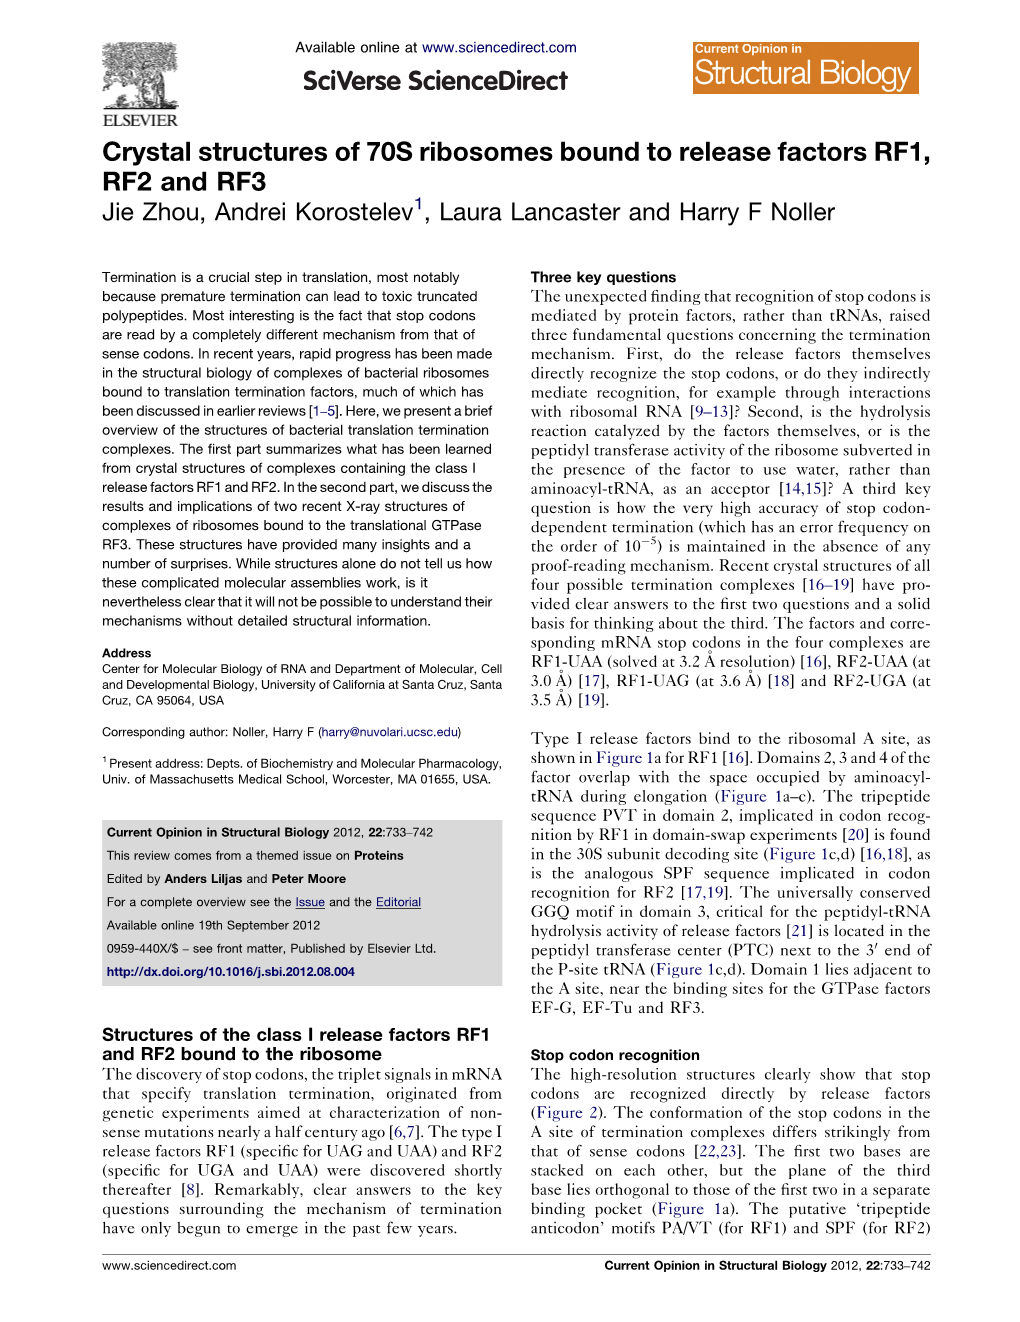 Crystal Structures of 70S Ribosomes Bound to Release Factors RF1, RF2 and RF3 Jie Zhou, Andrei Korostelev1, Laura Lancaster and Harry F Noller